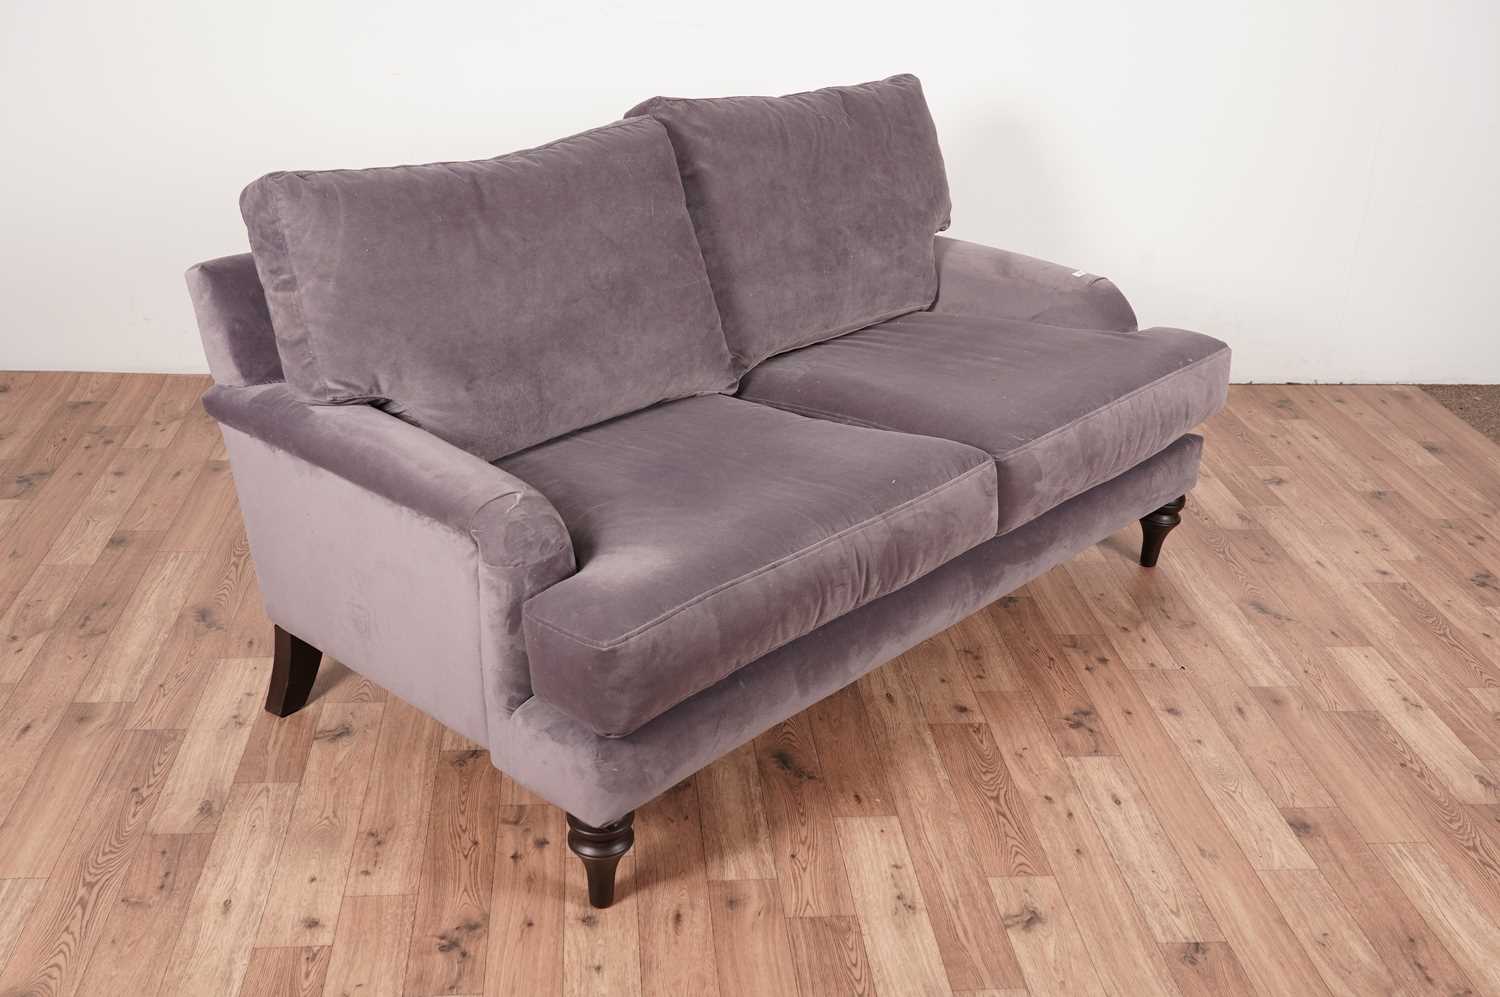 A grey two-seater sofa by The Lounge Co - Image 4 of 4